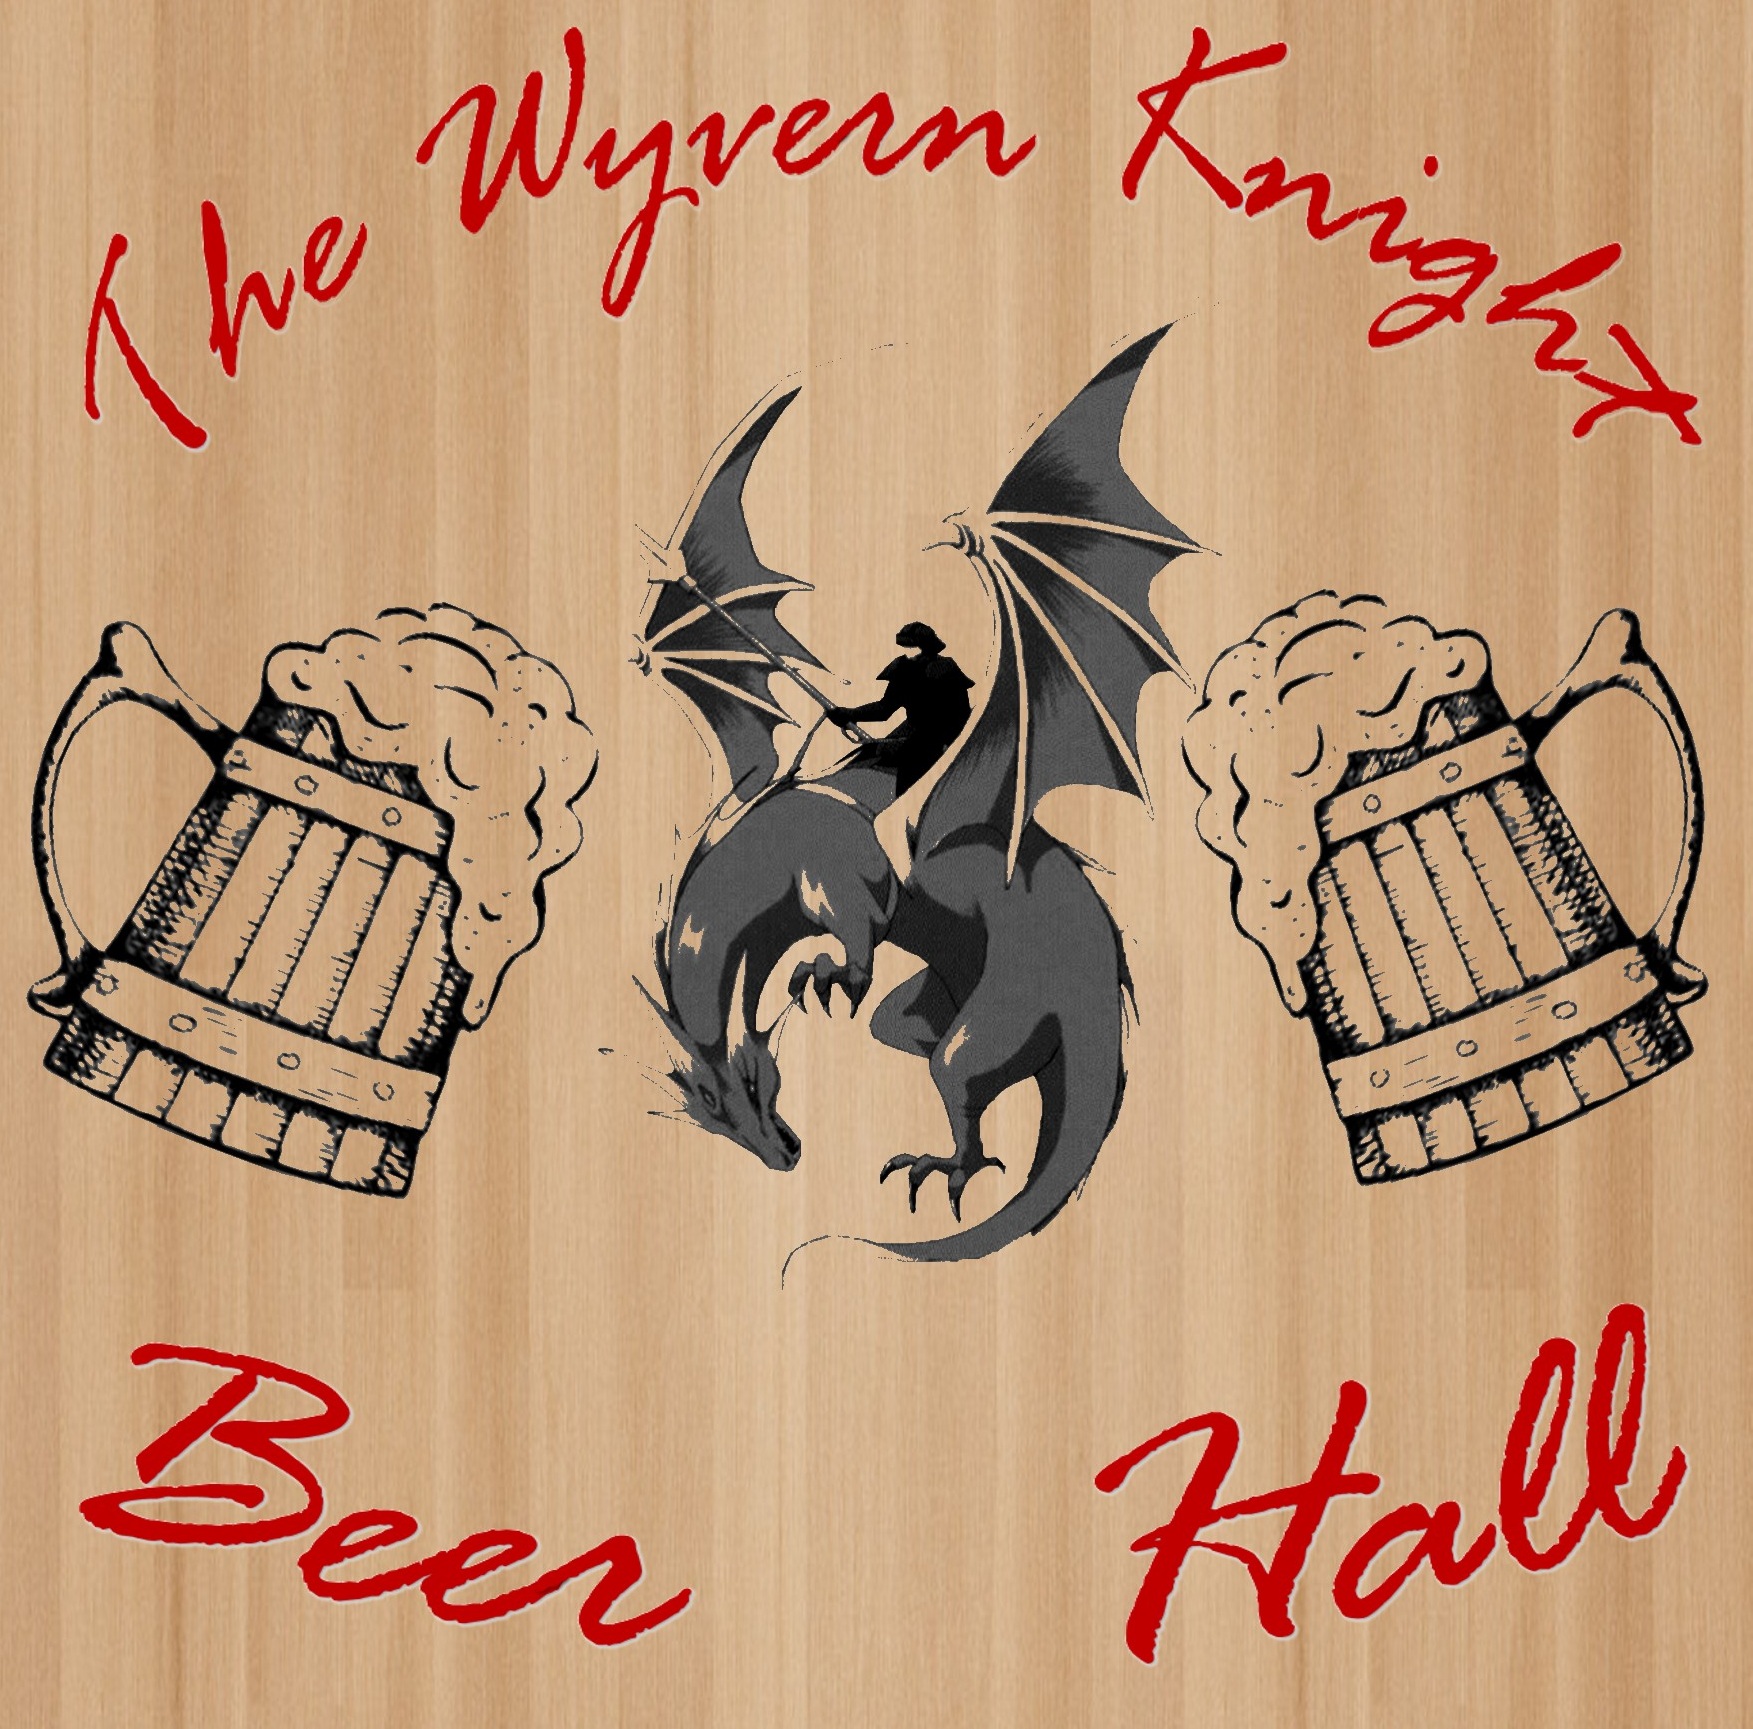 The Wyvern Knight Beer Hall Sign